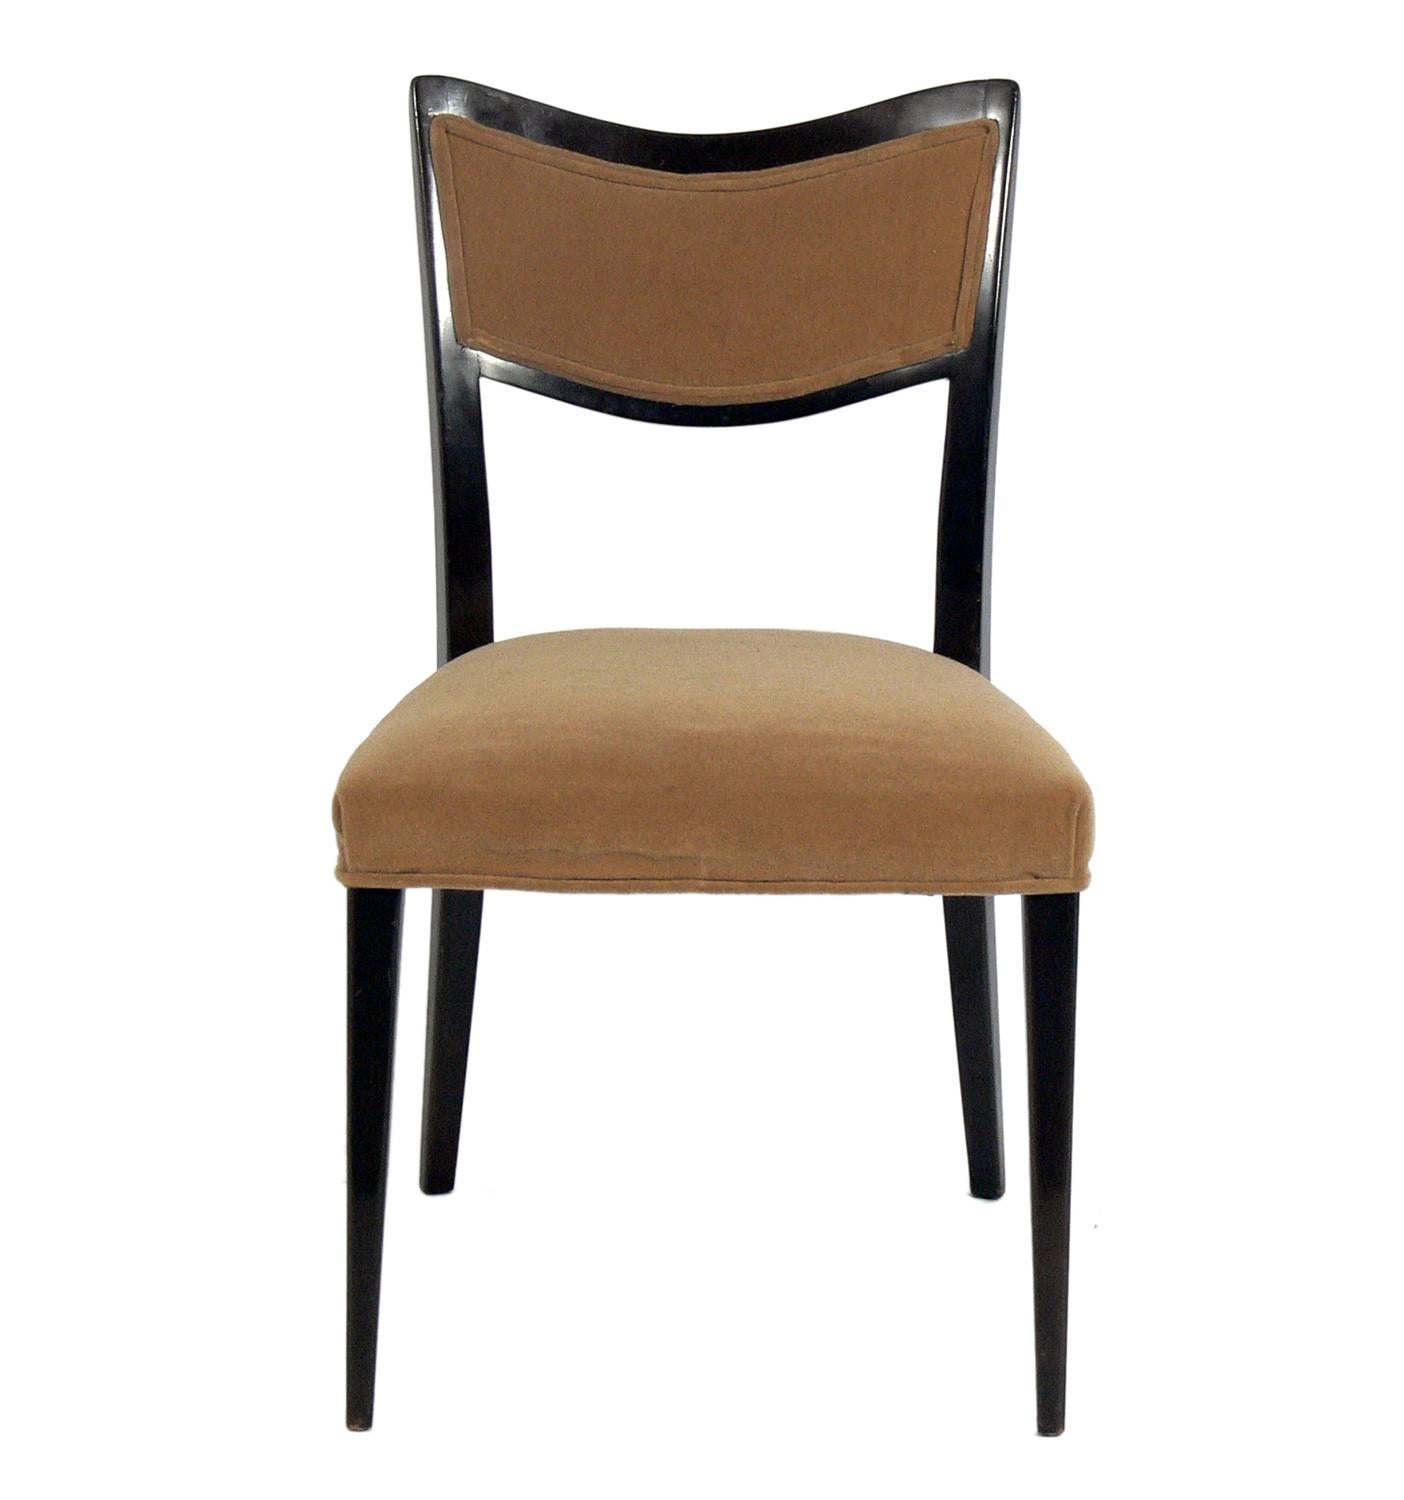 Set of four curvaceous dining chairs, designed by Harvey Probber, American, circa 1960s. This set is currently being refinished and reupholstered, and can be completed in your choice of finish color and upholstered in your fabric. The price noted